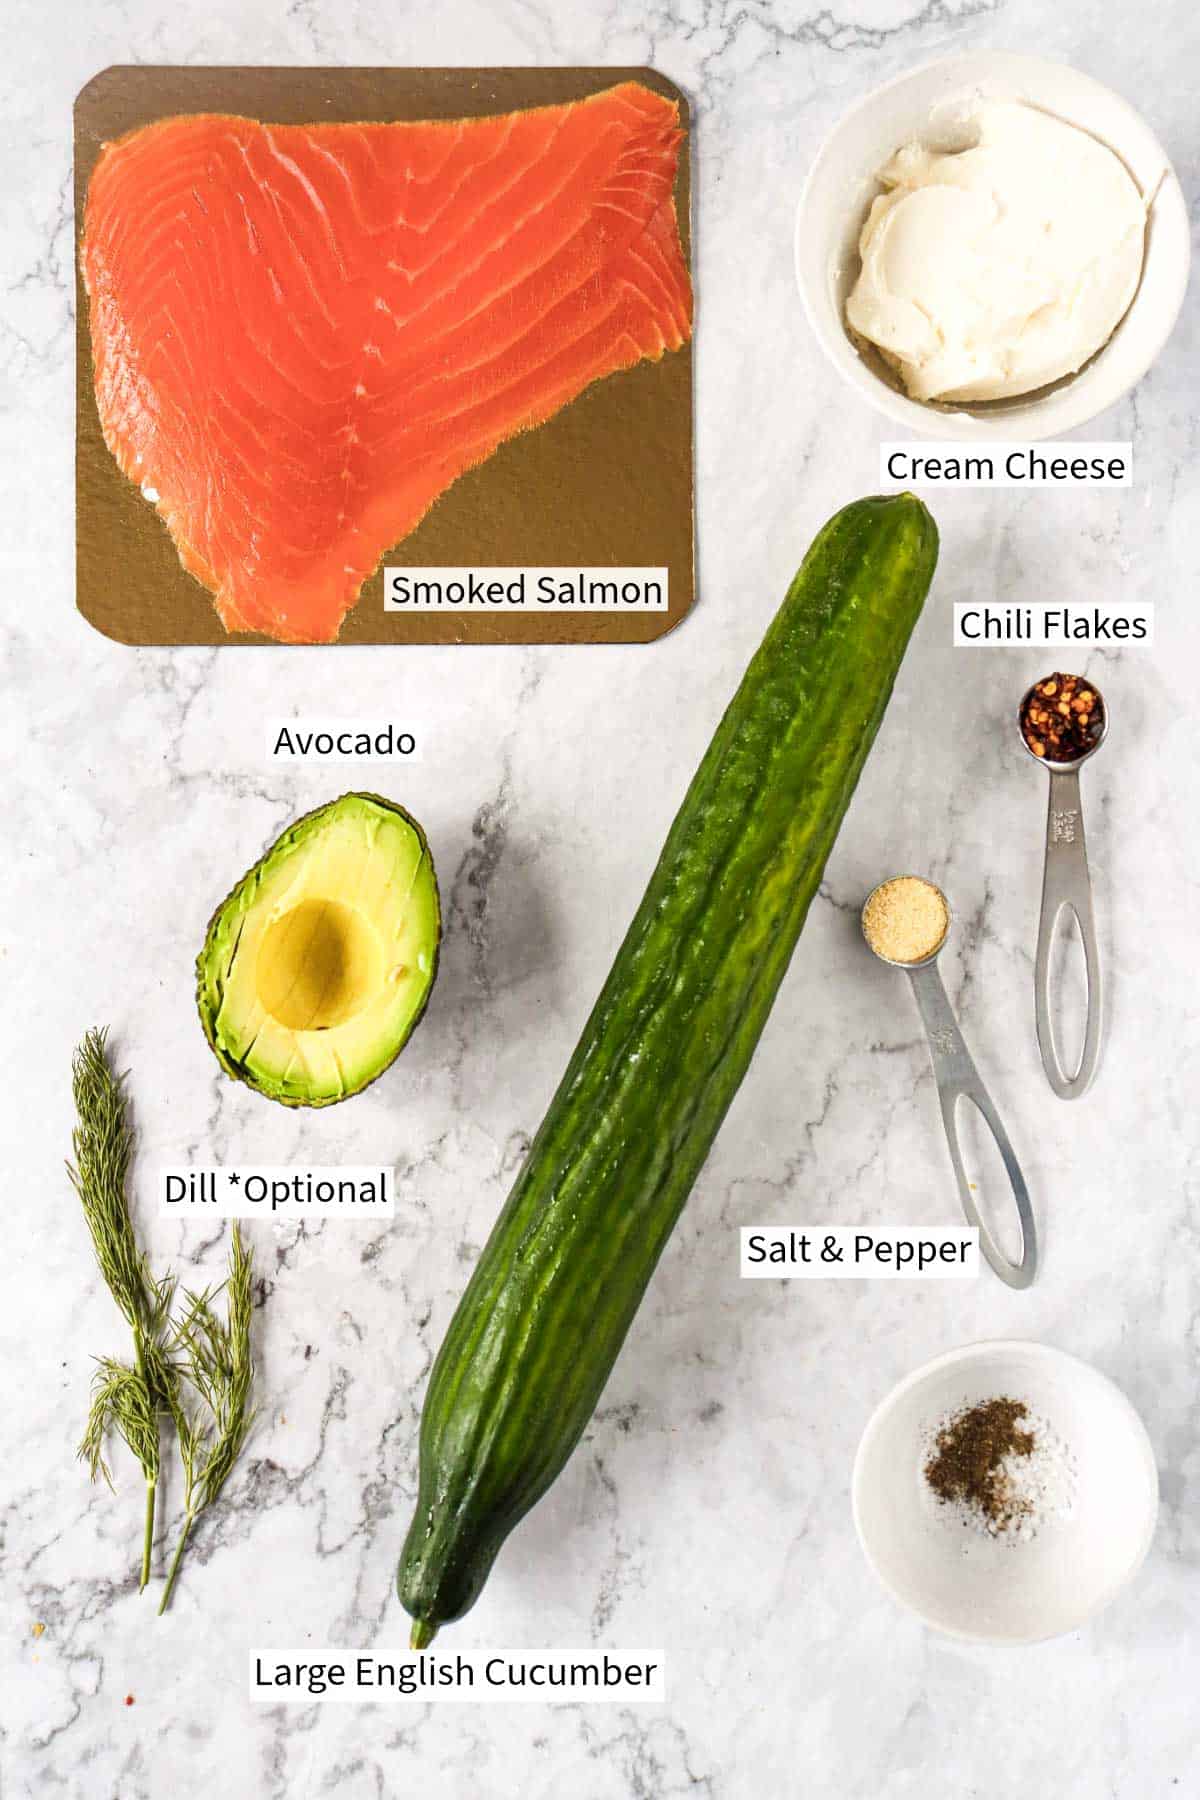 Ingredients for cucumber roll ups displayed on a marble table including smoked salmon, cream cheese, an avocado, cucumber, dill, chili flakes, and seasonings.